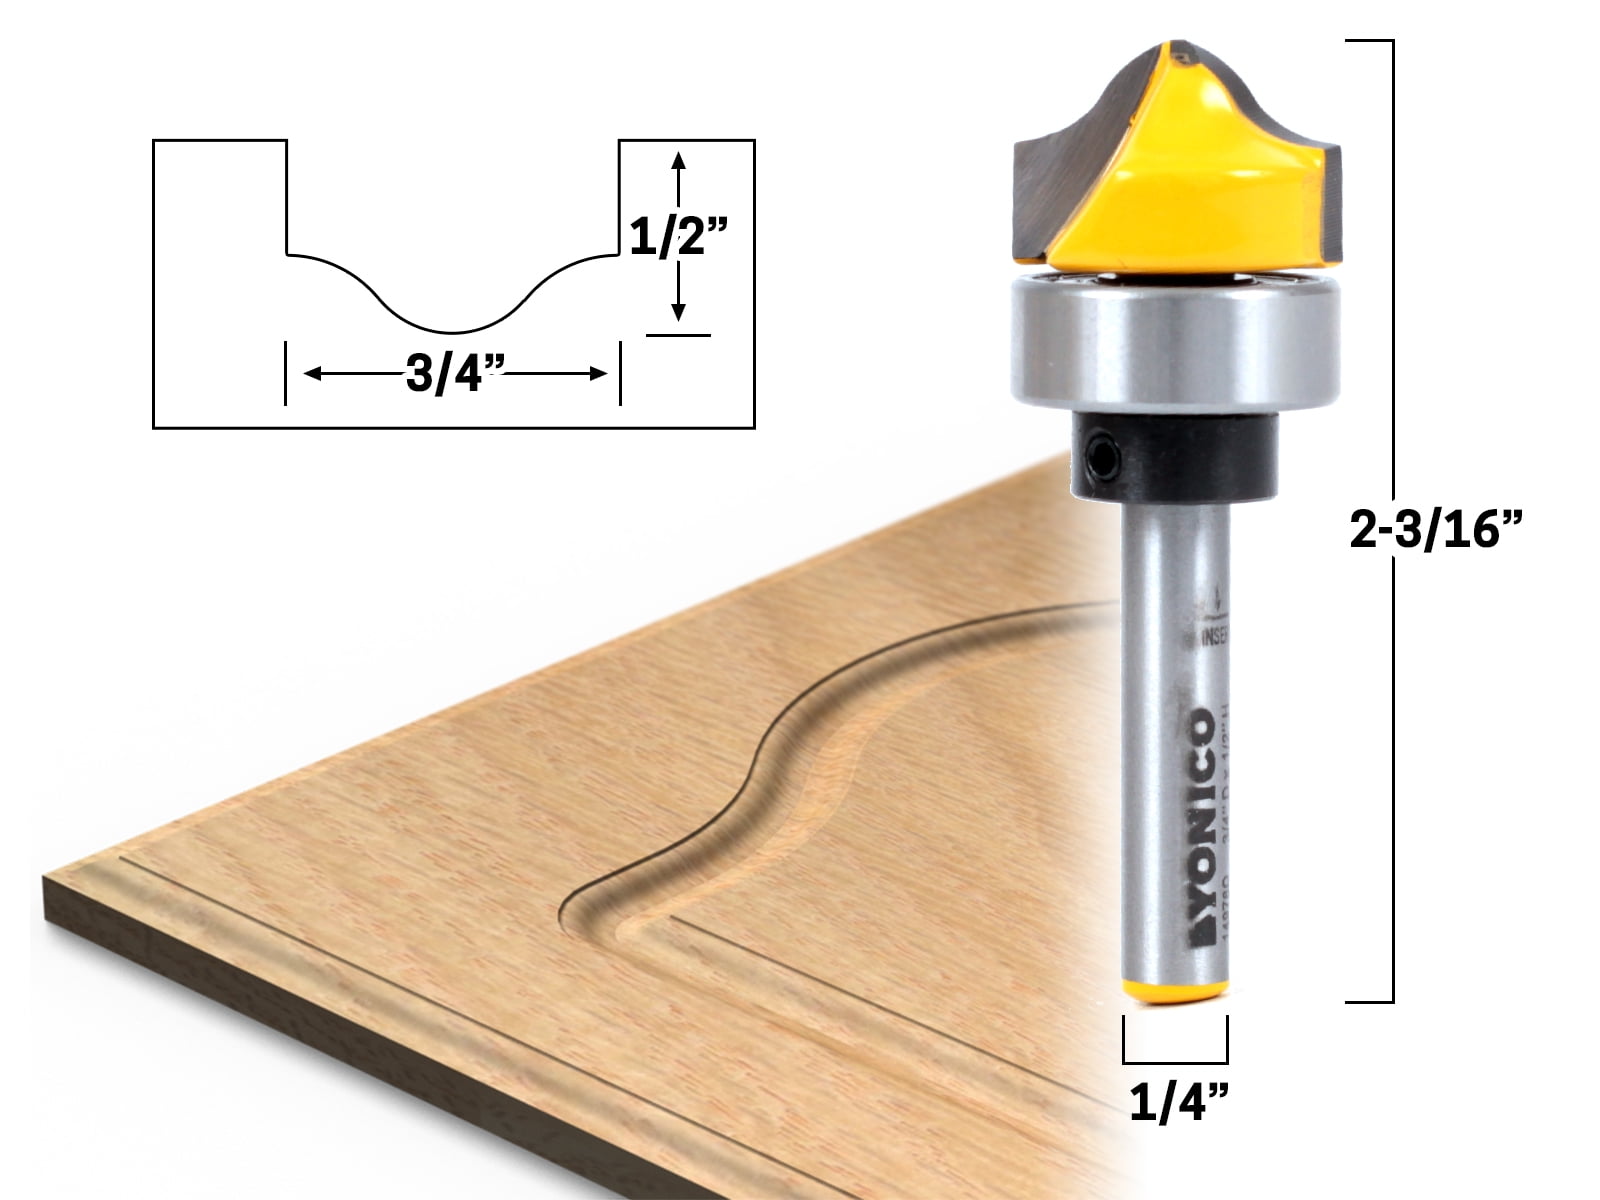 3-4-faux-panel-ogee-groove-template-router-bit-1-4-shank-yonico